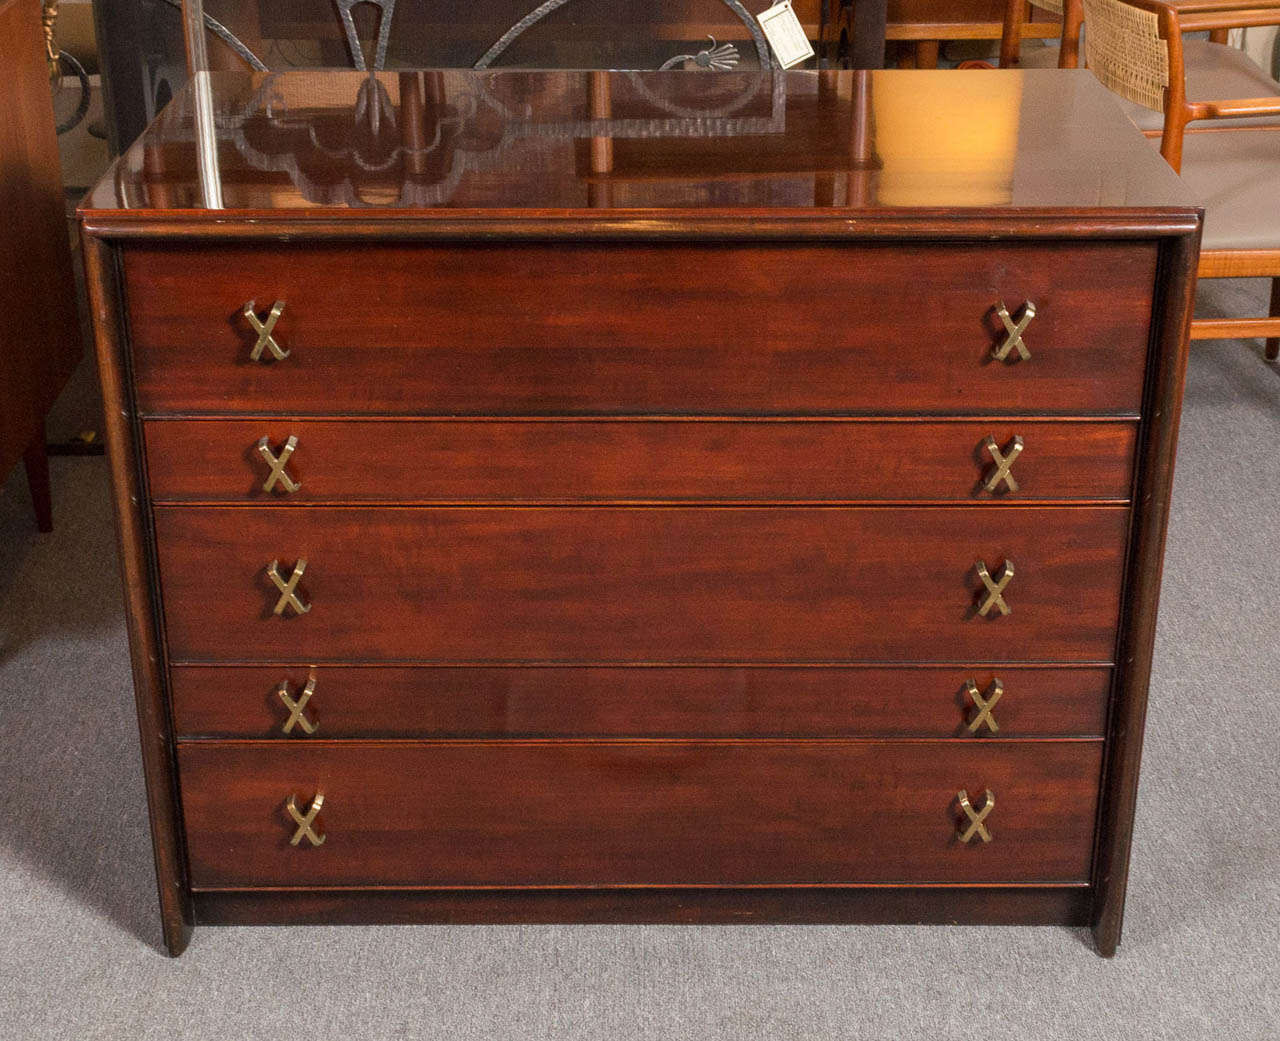 Offering a wonderfully scaled five drawer chest designed by Paul Frankl for Johnson Brothers furniture.  The chest maintains it's original mahogany stained and lacquered finish.